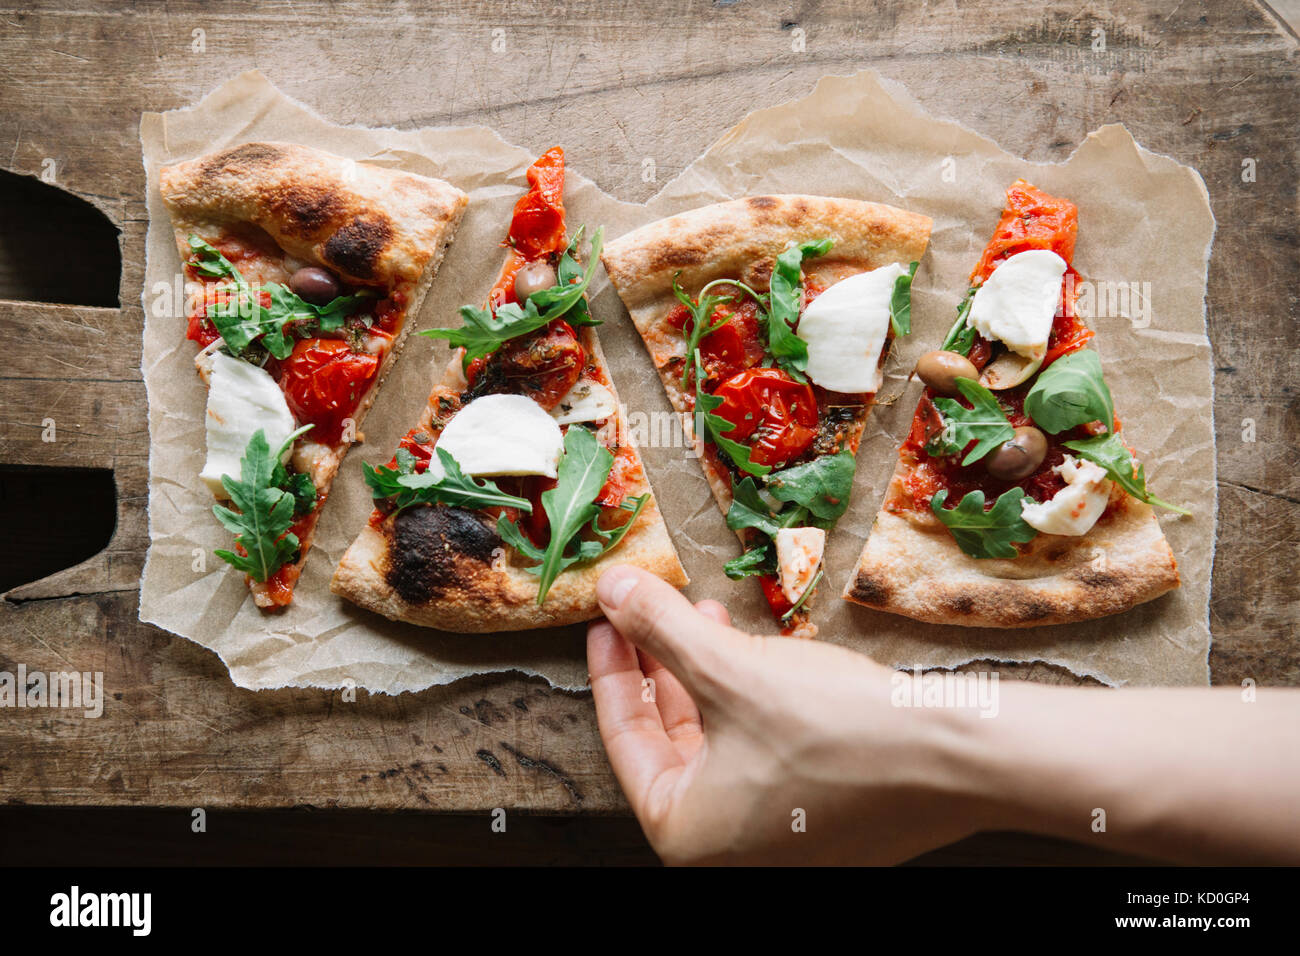 Woman taking pizza slice from chopping board, overhead view Stock Photo